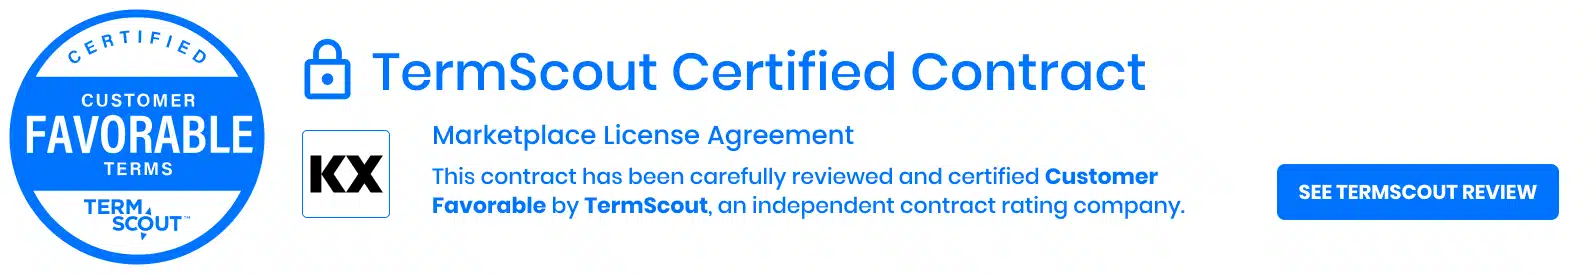 Teamscout Marketplace License Agreement